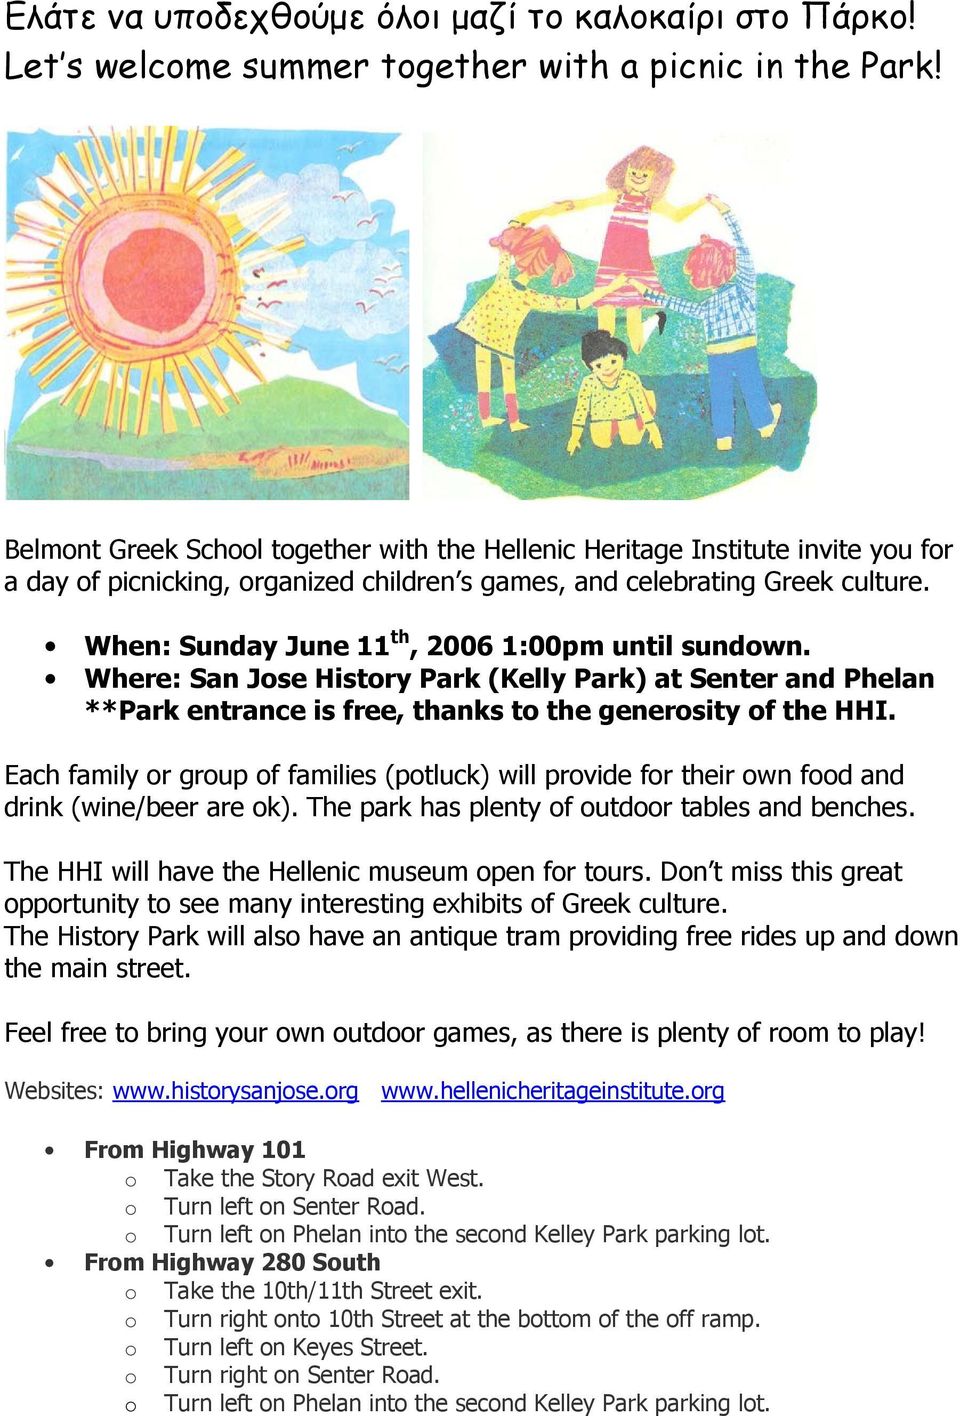 When: Sunday June 11 th, 2006 1:00pm until sundown. Where: San Jose History Park (Kelly Park) at Senter and Phelan **Park entrance is free, thanks to the generosity of the HHI.